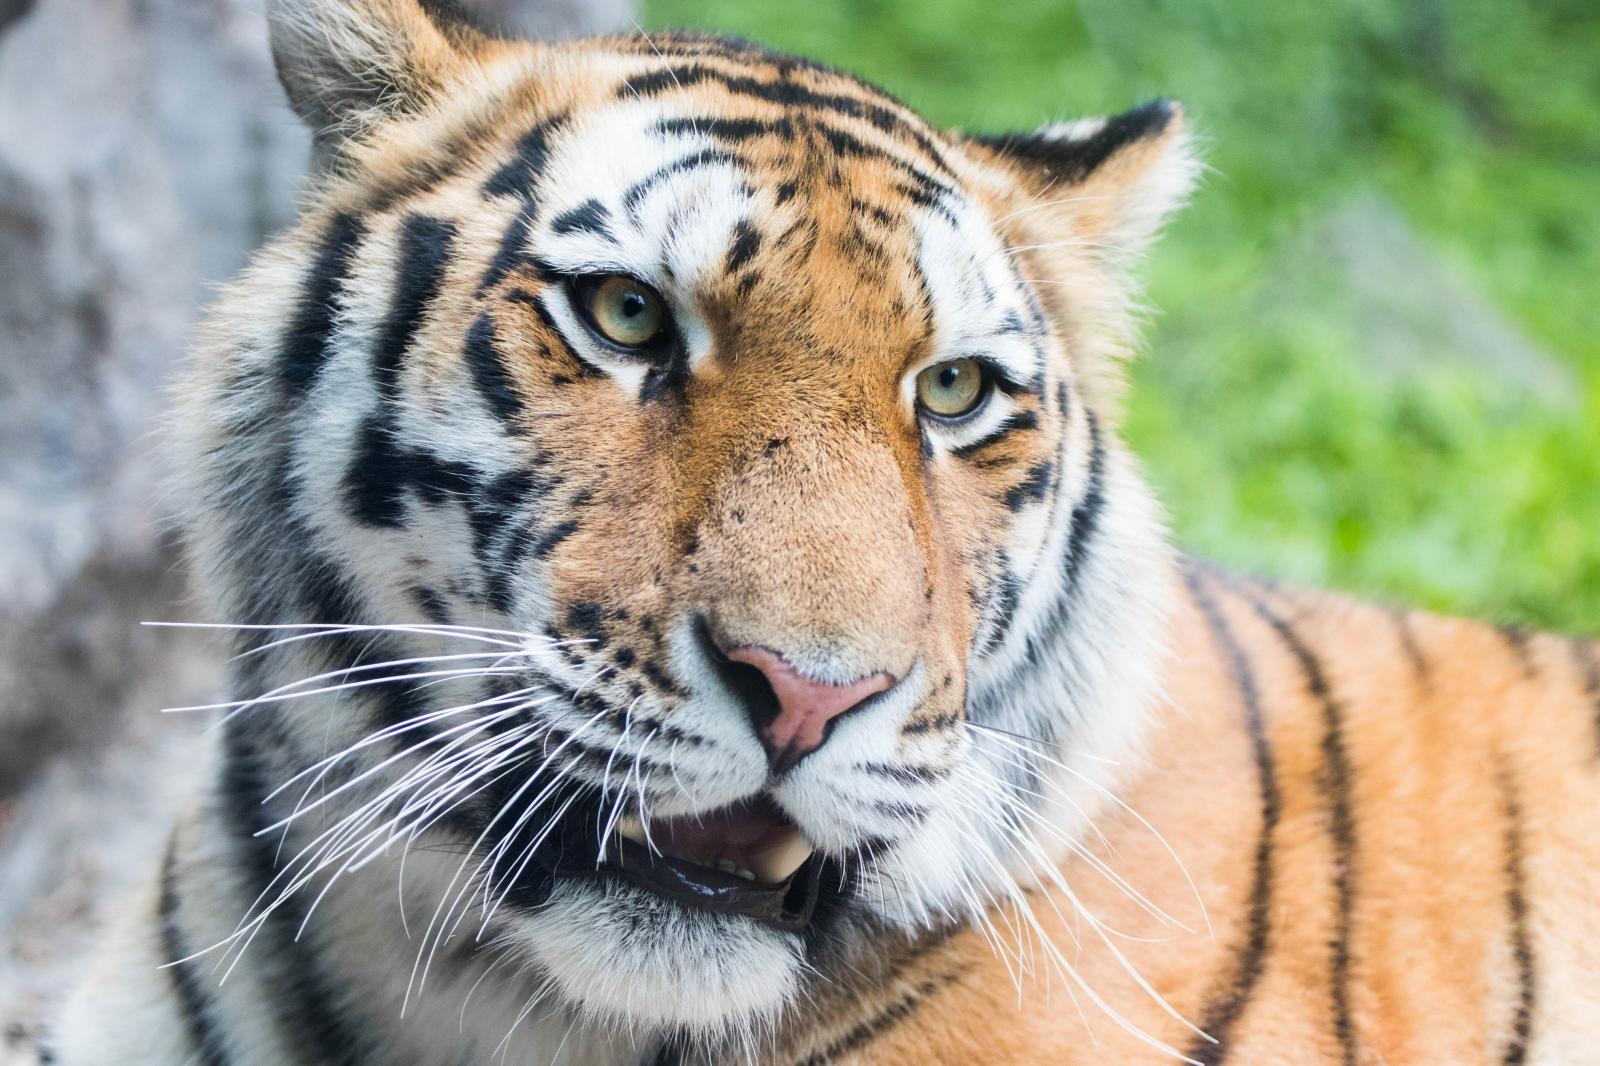 Image from Wildlife - Amur Tiger located at the Minnesota Zoo.